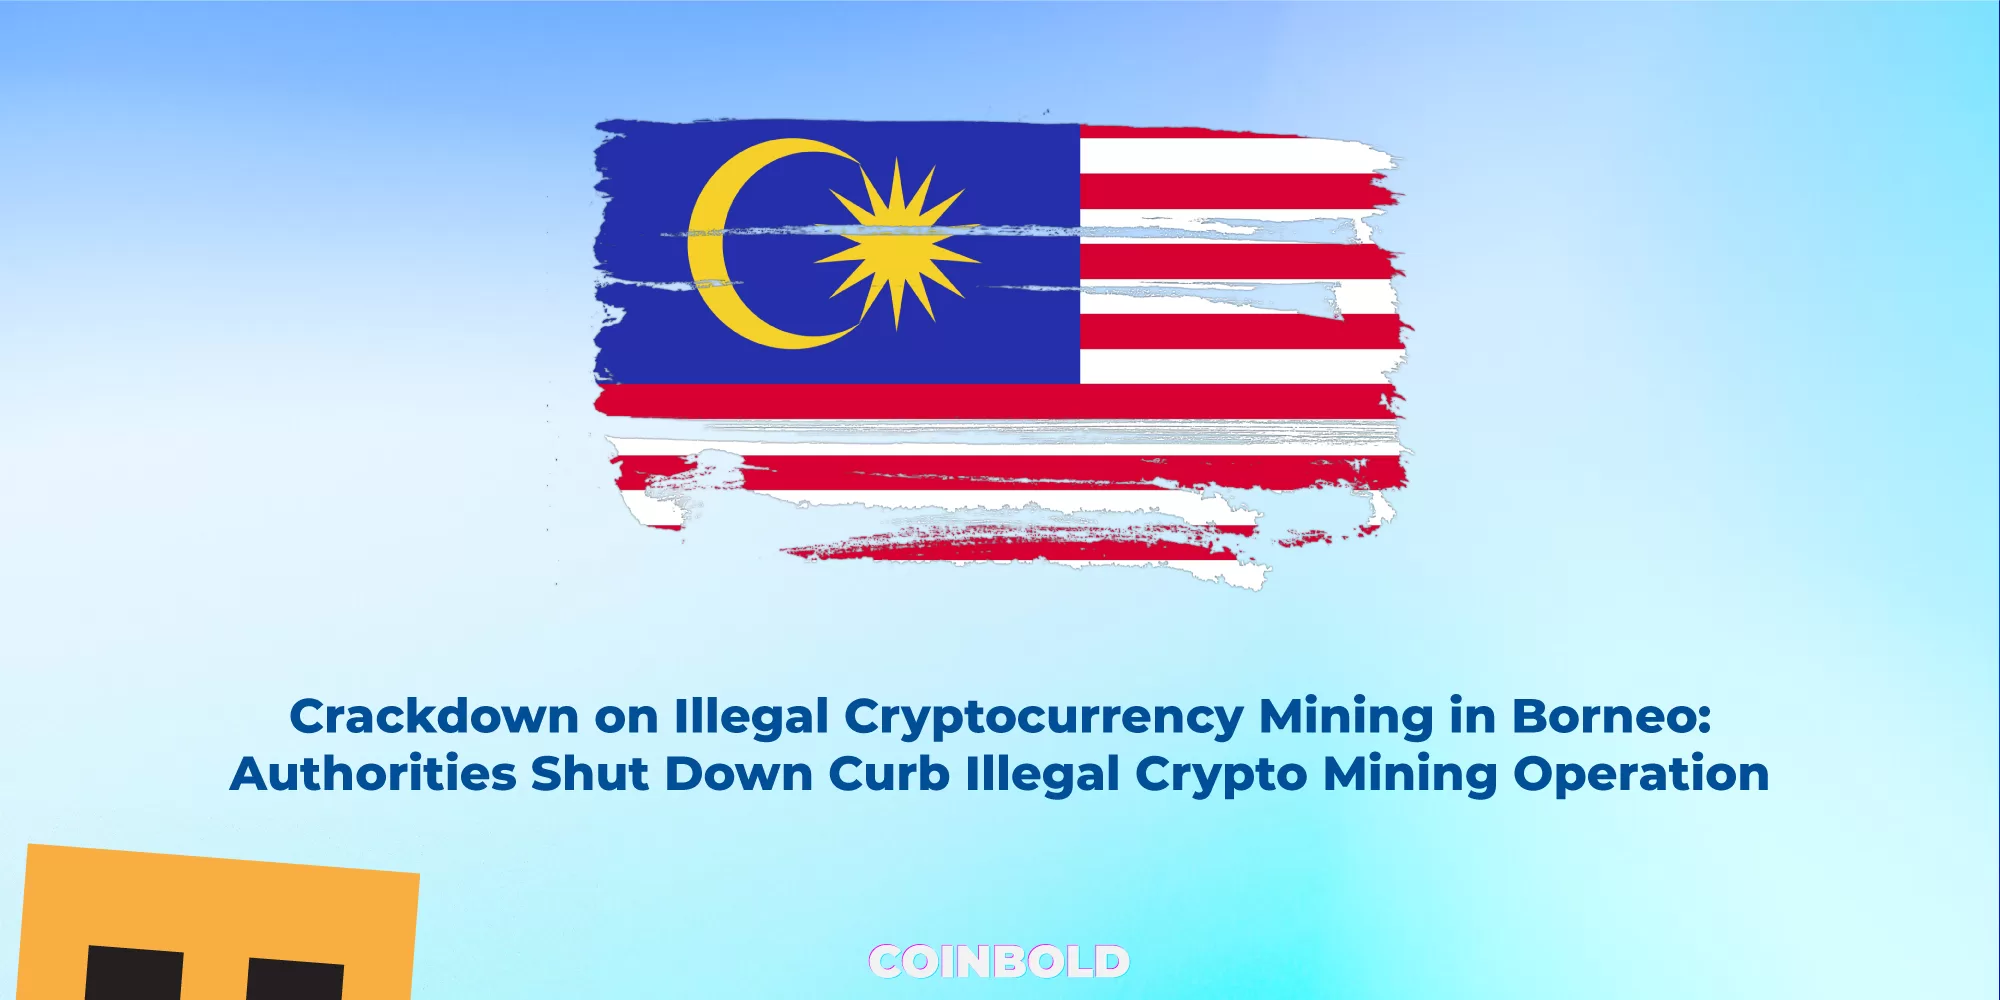 Crackdown on Illegal Cryptocurrency Mining in Borneo: Authorities Shut Down Curb Illegal Crypto Mining Operation